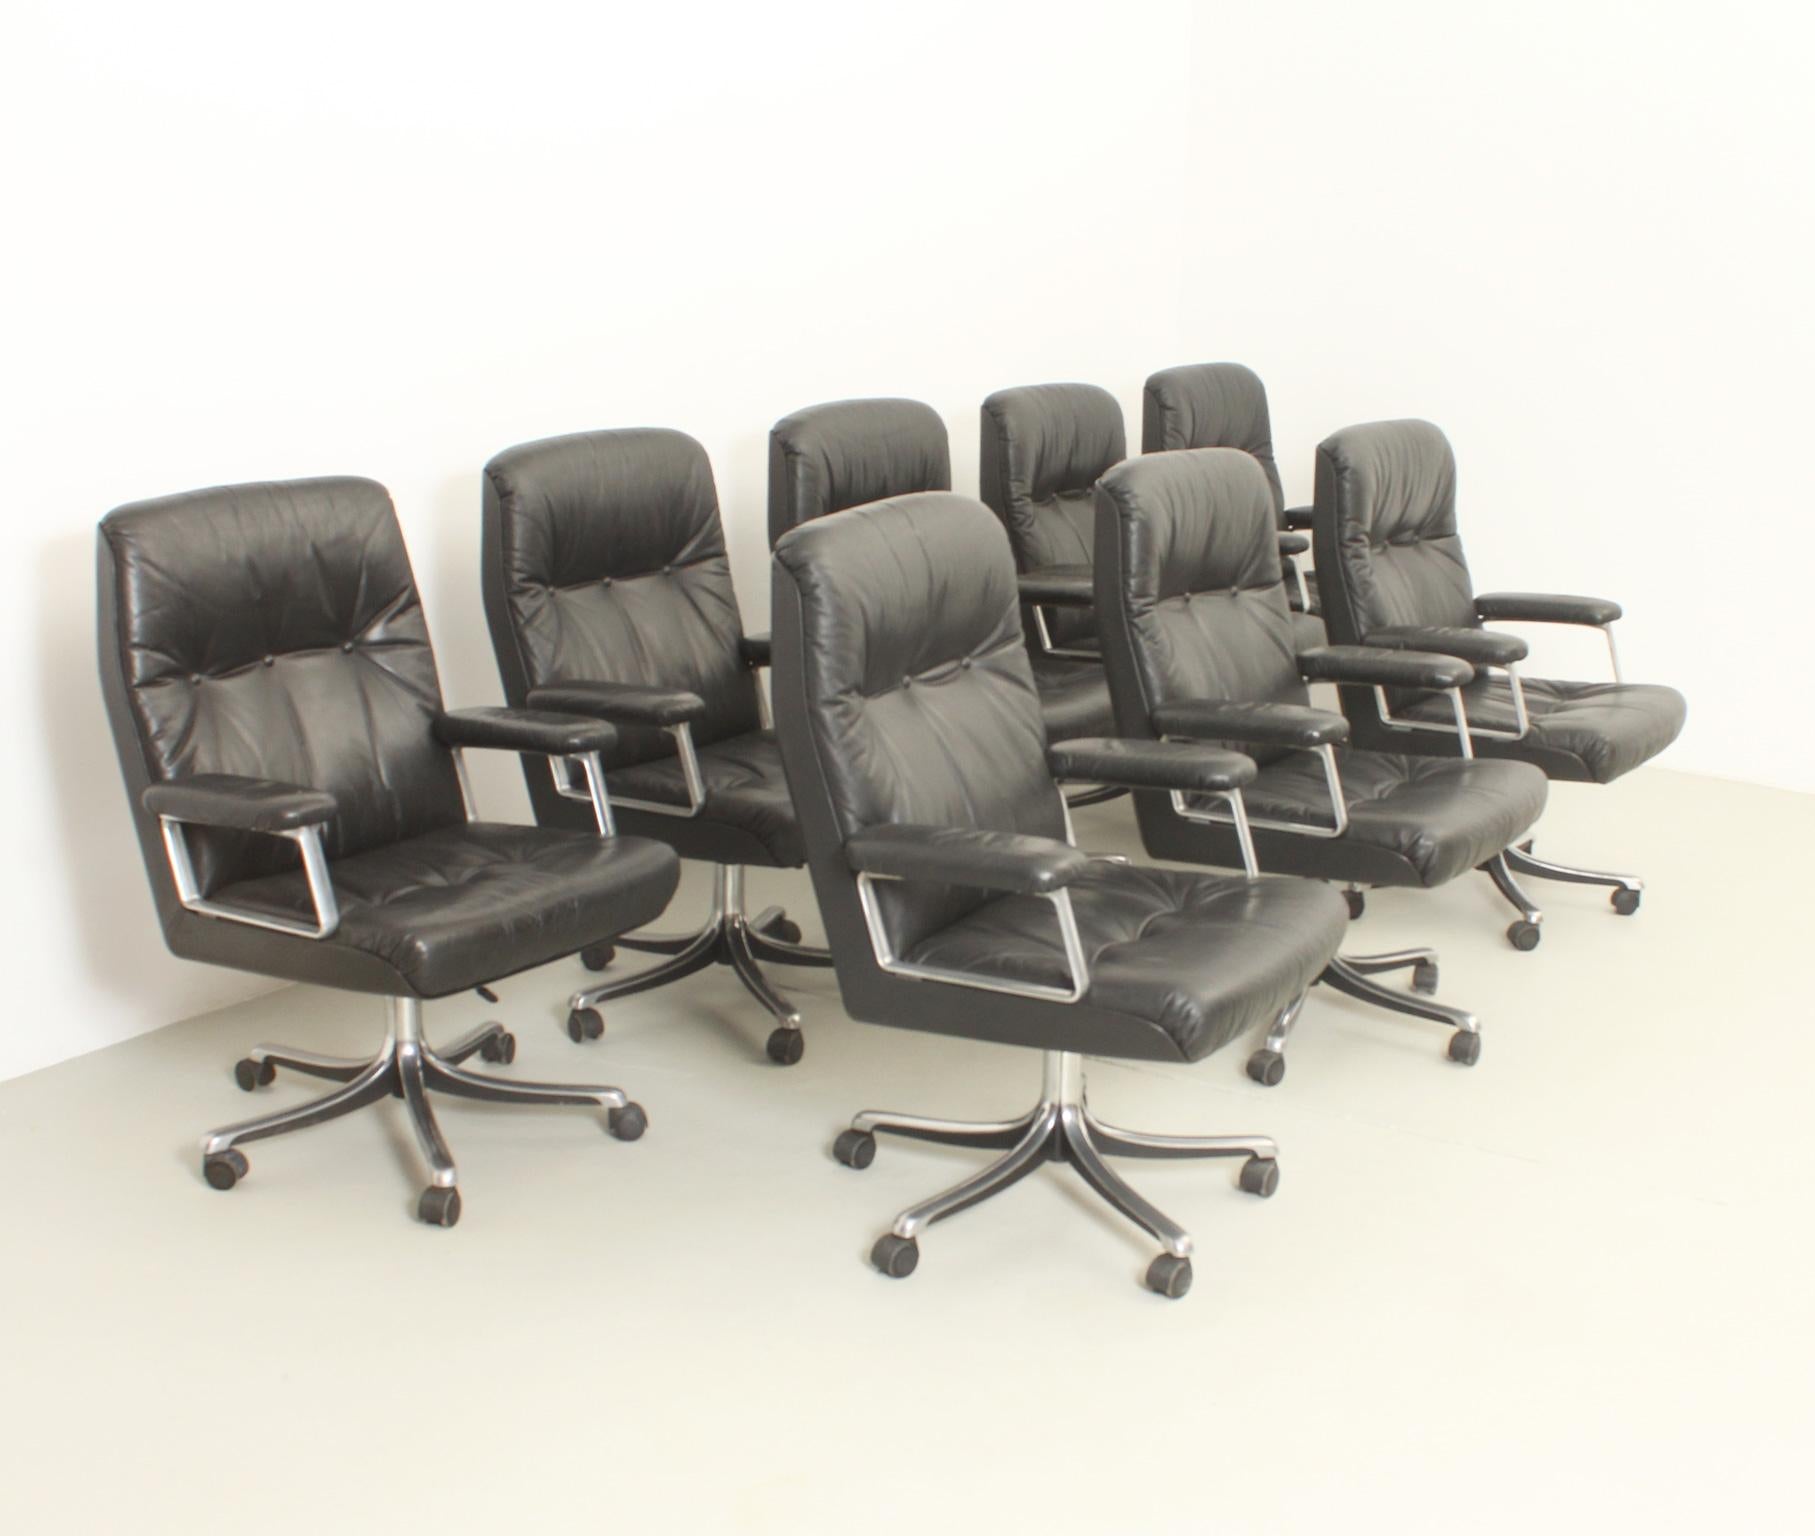 Set of eight office chair designed in 1966-1976 by Osvaldo Borsani for Tecno, Italy. Cast aluminum with chrome-plated bases and original black leather upholstery. Swivel base with adjustable height and original casters. This is the 1976 version with